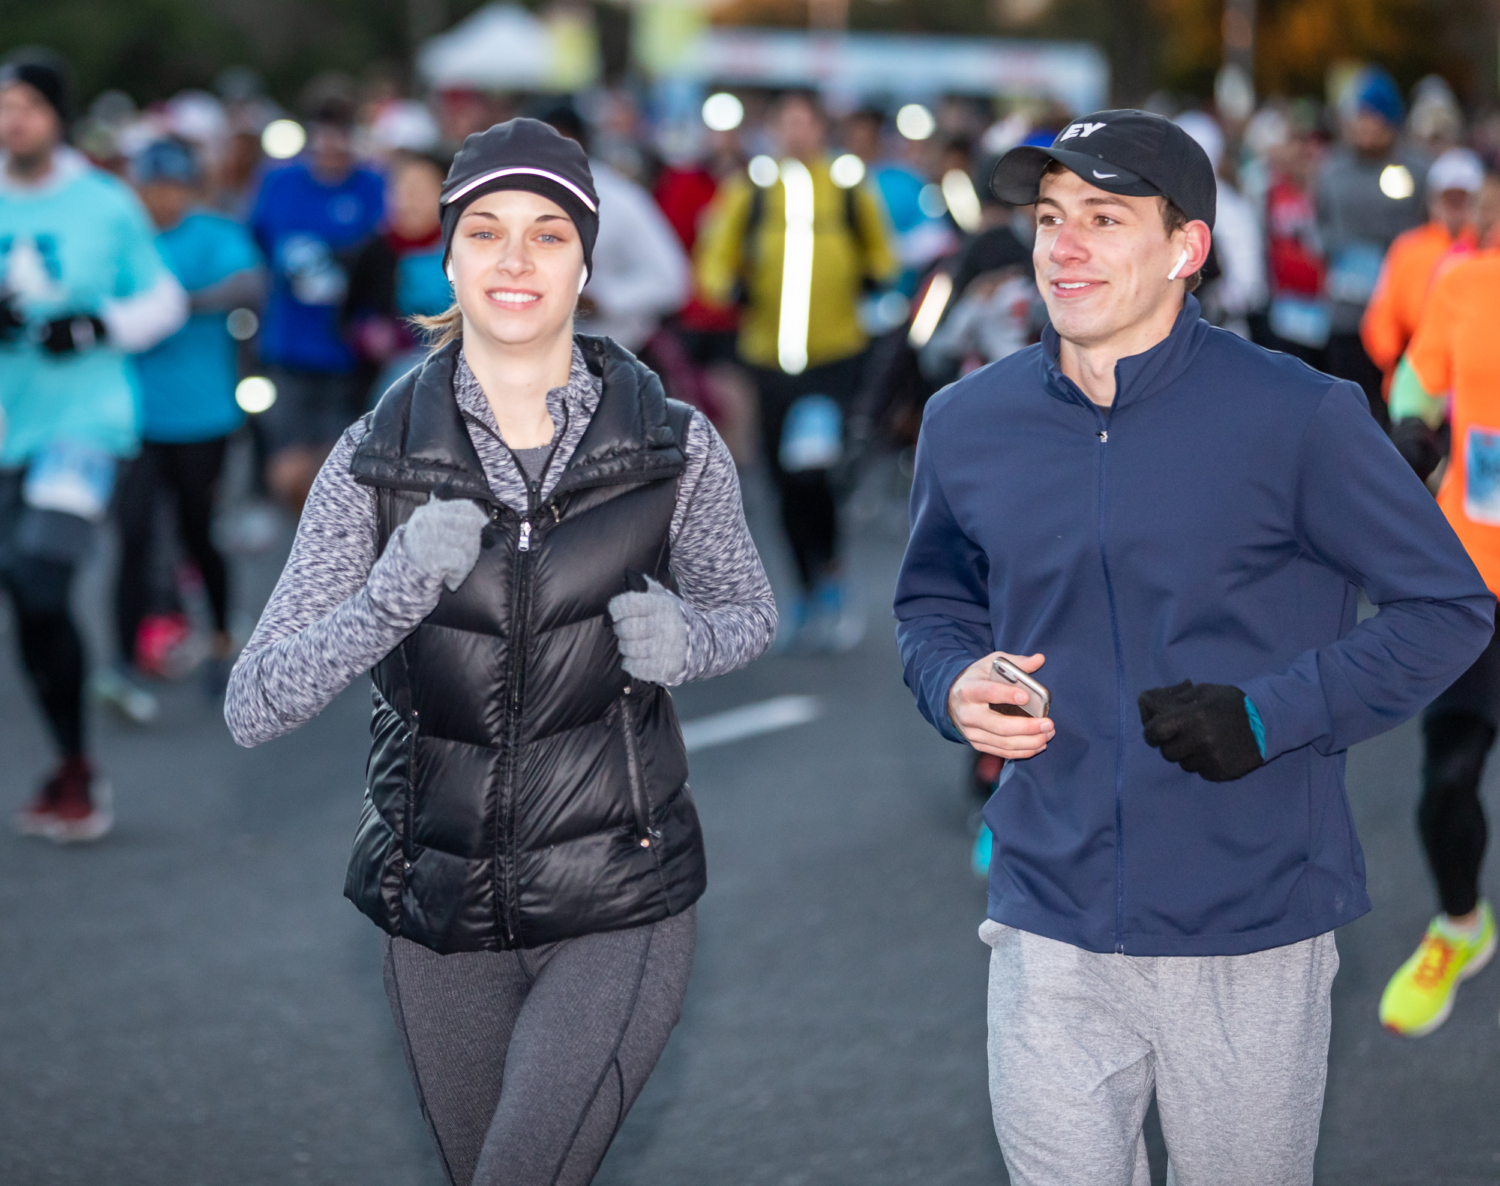 Two runners stay safe by running together and carrying their phone.